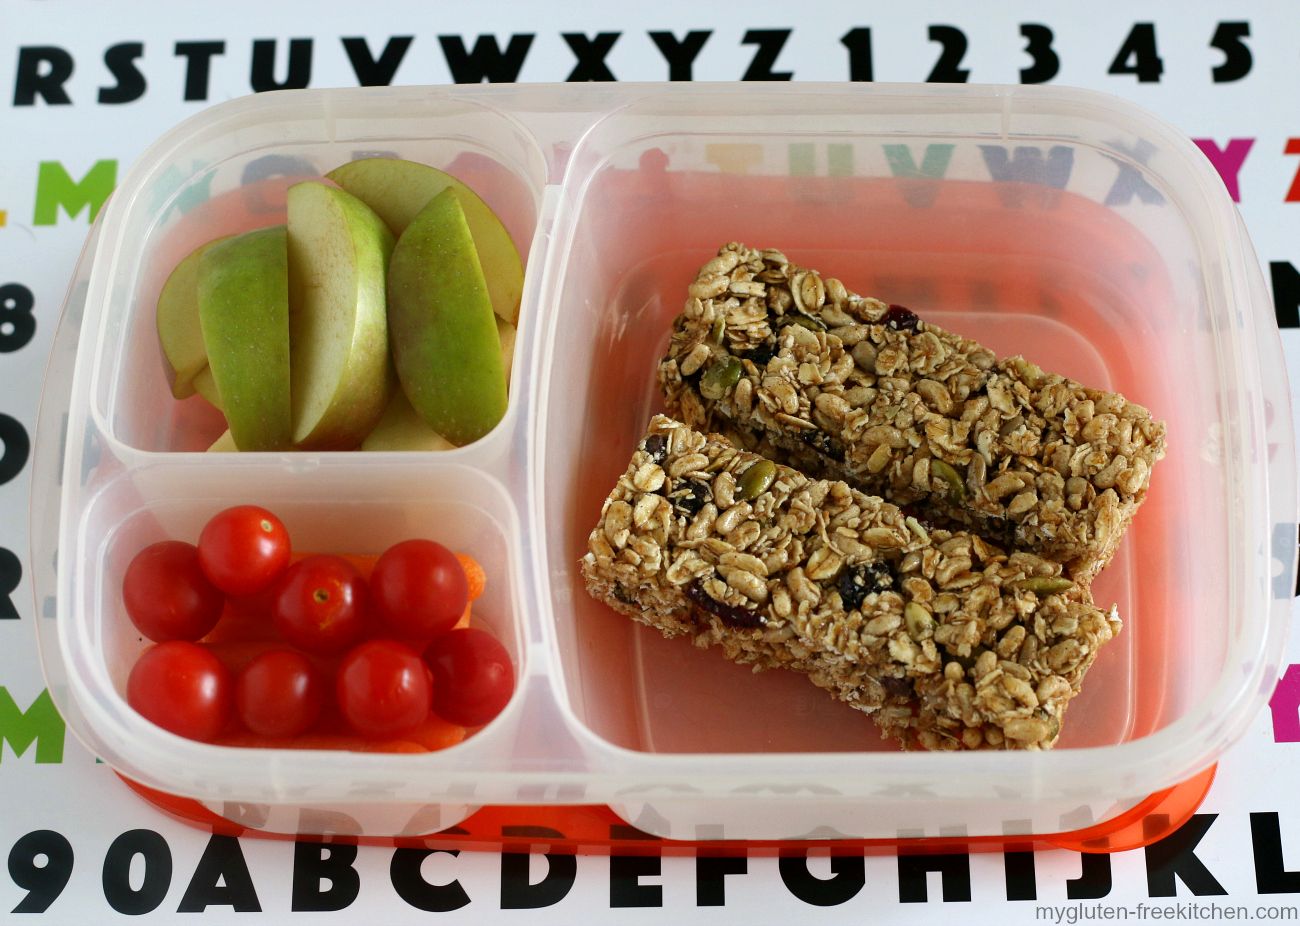 Allergy friendly, gluten-free lunch with homemade chewy granola bars